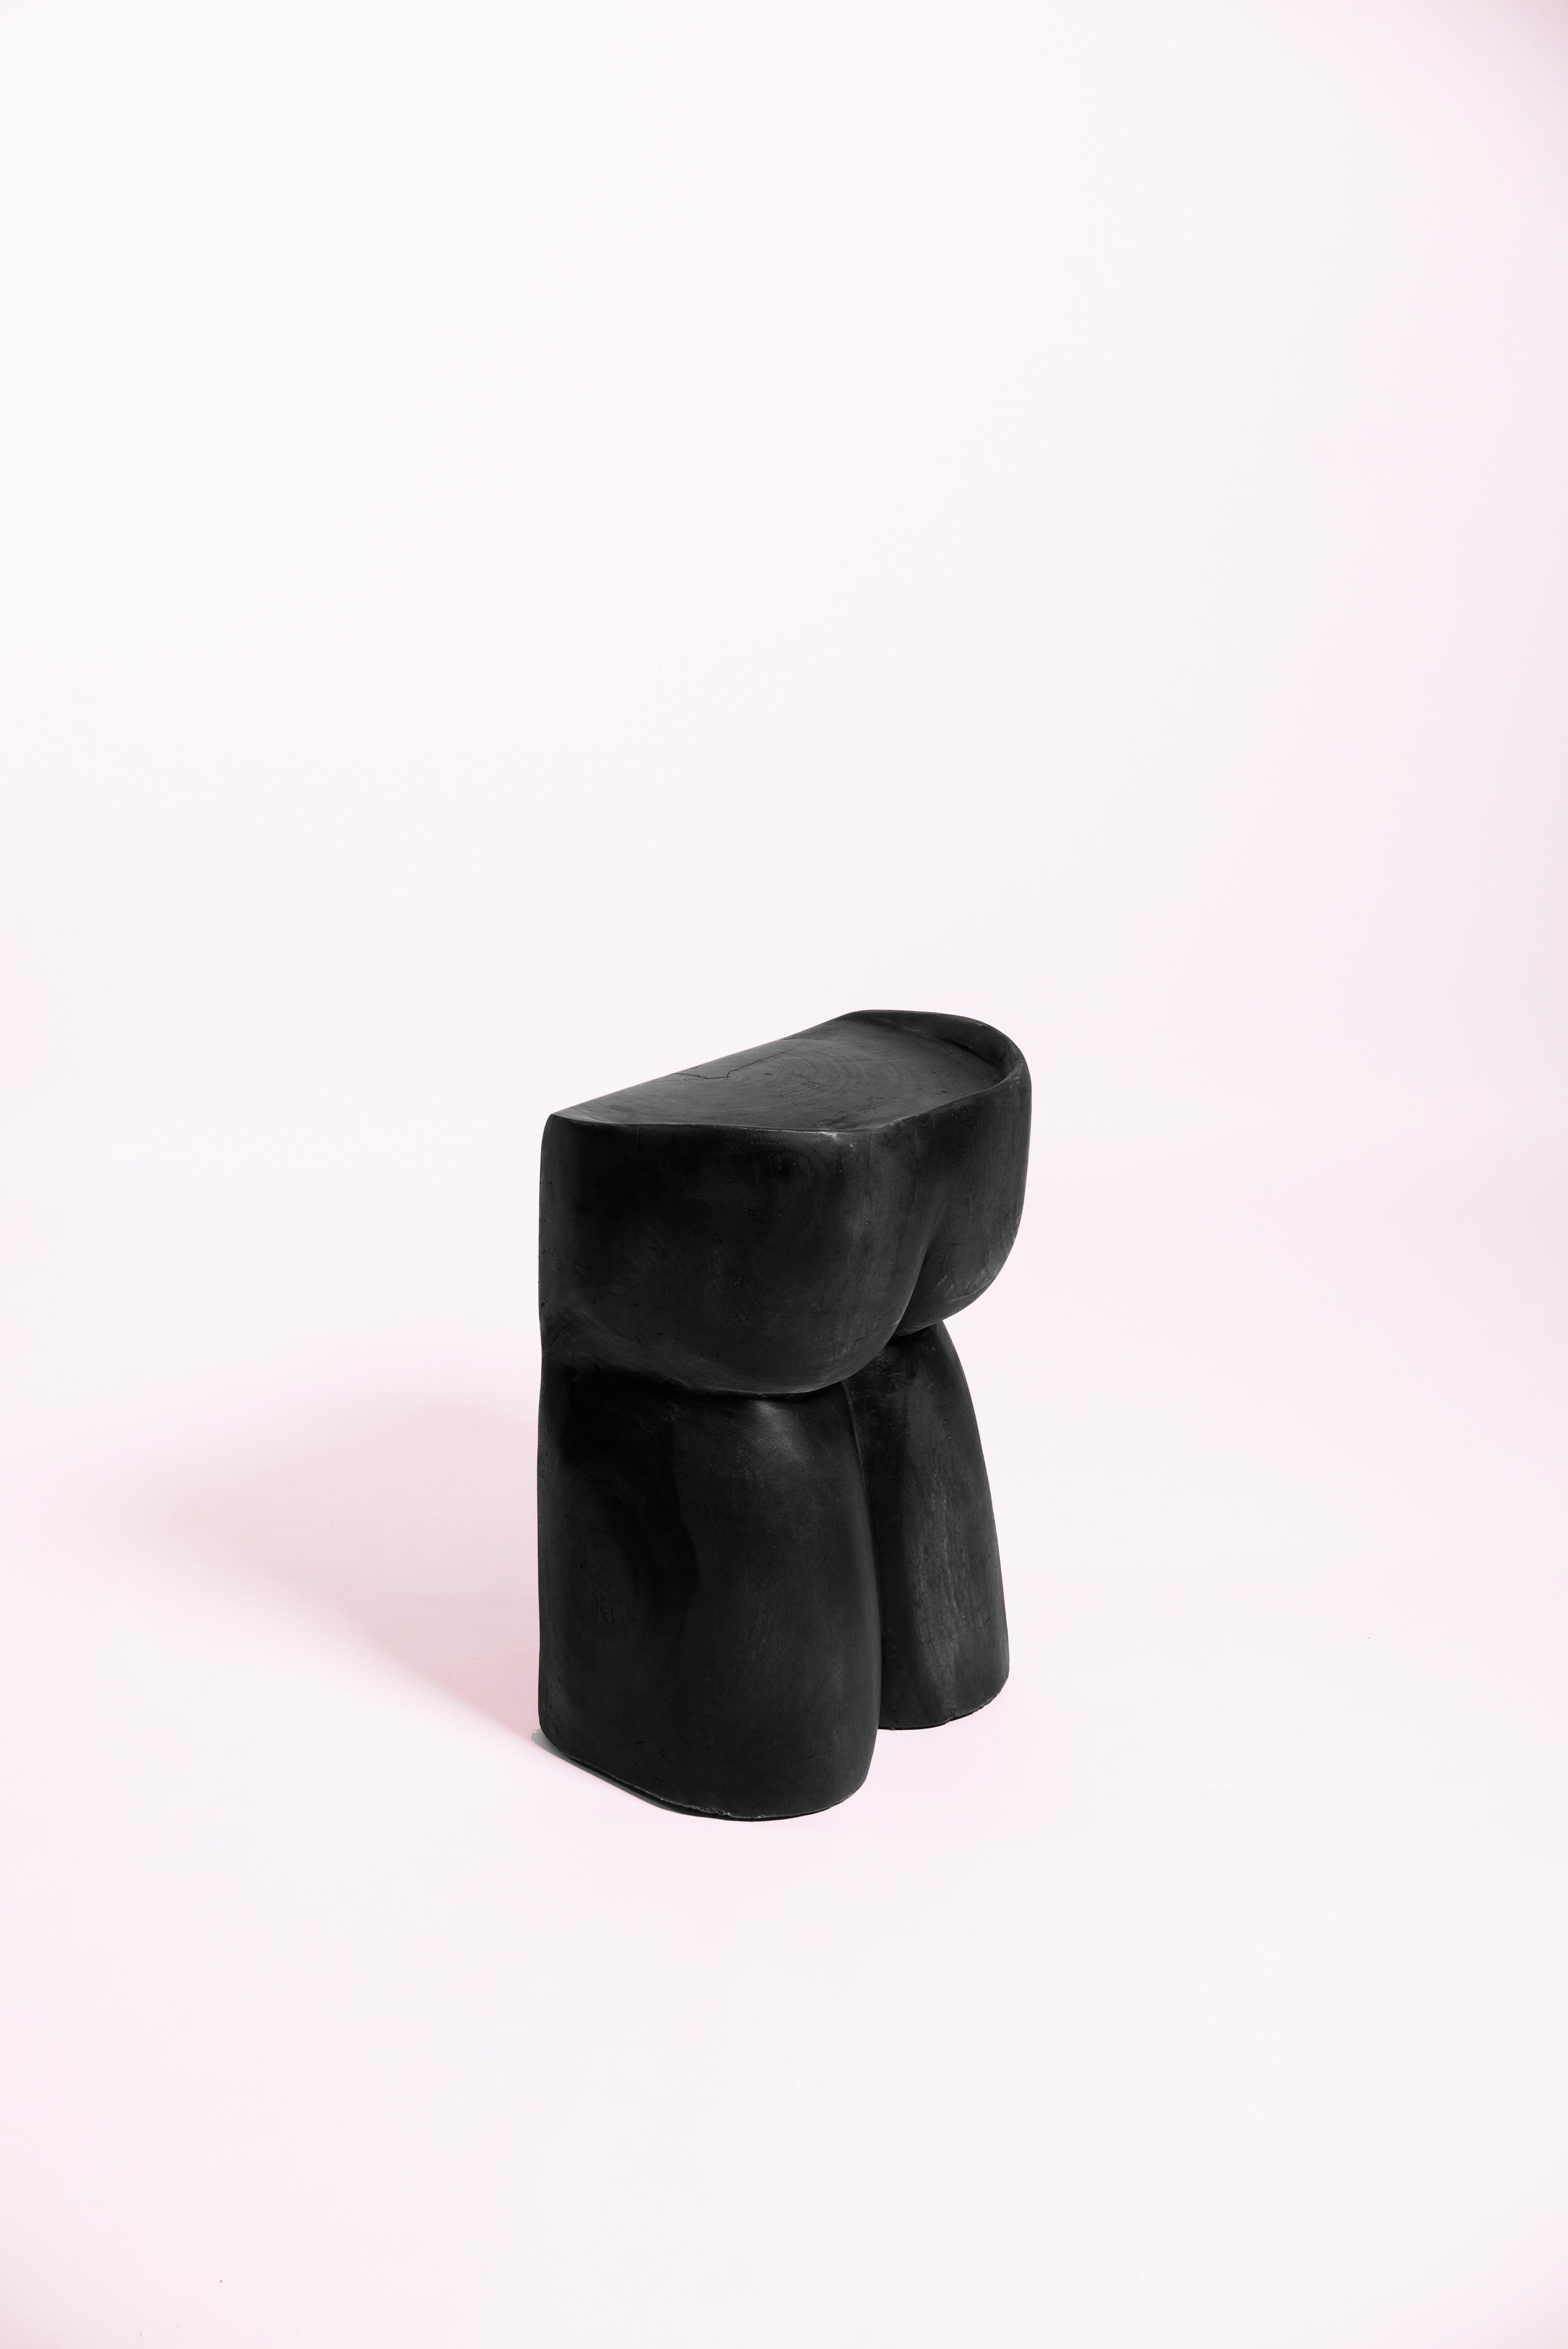 Solid wood stool sculpted by hand into a butt shape as a symbol of equality (we all have butts).